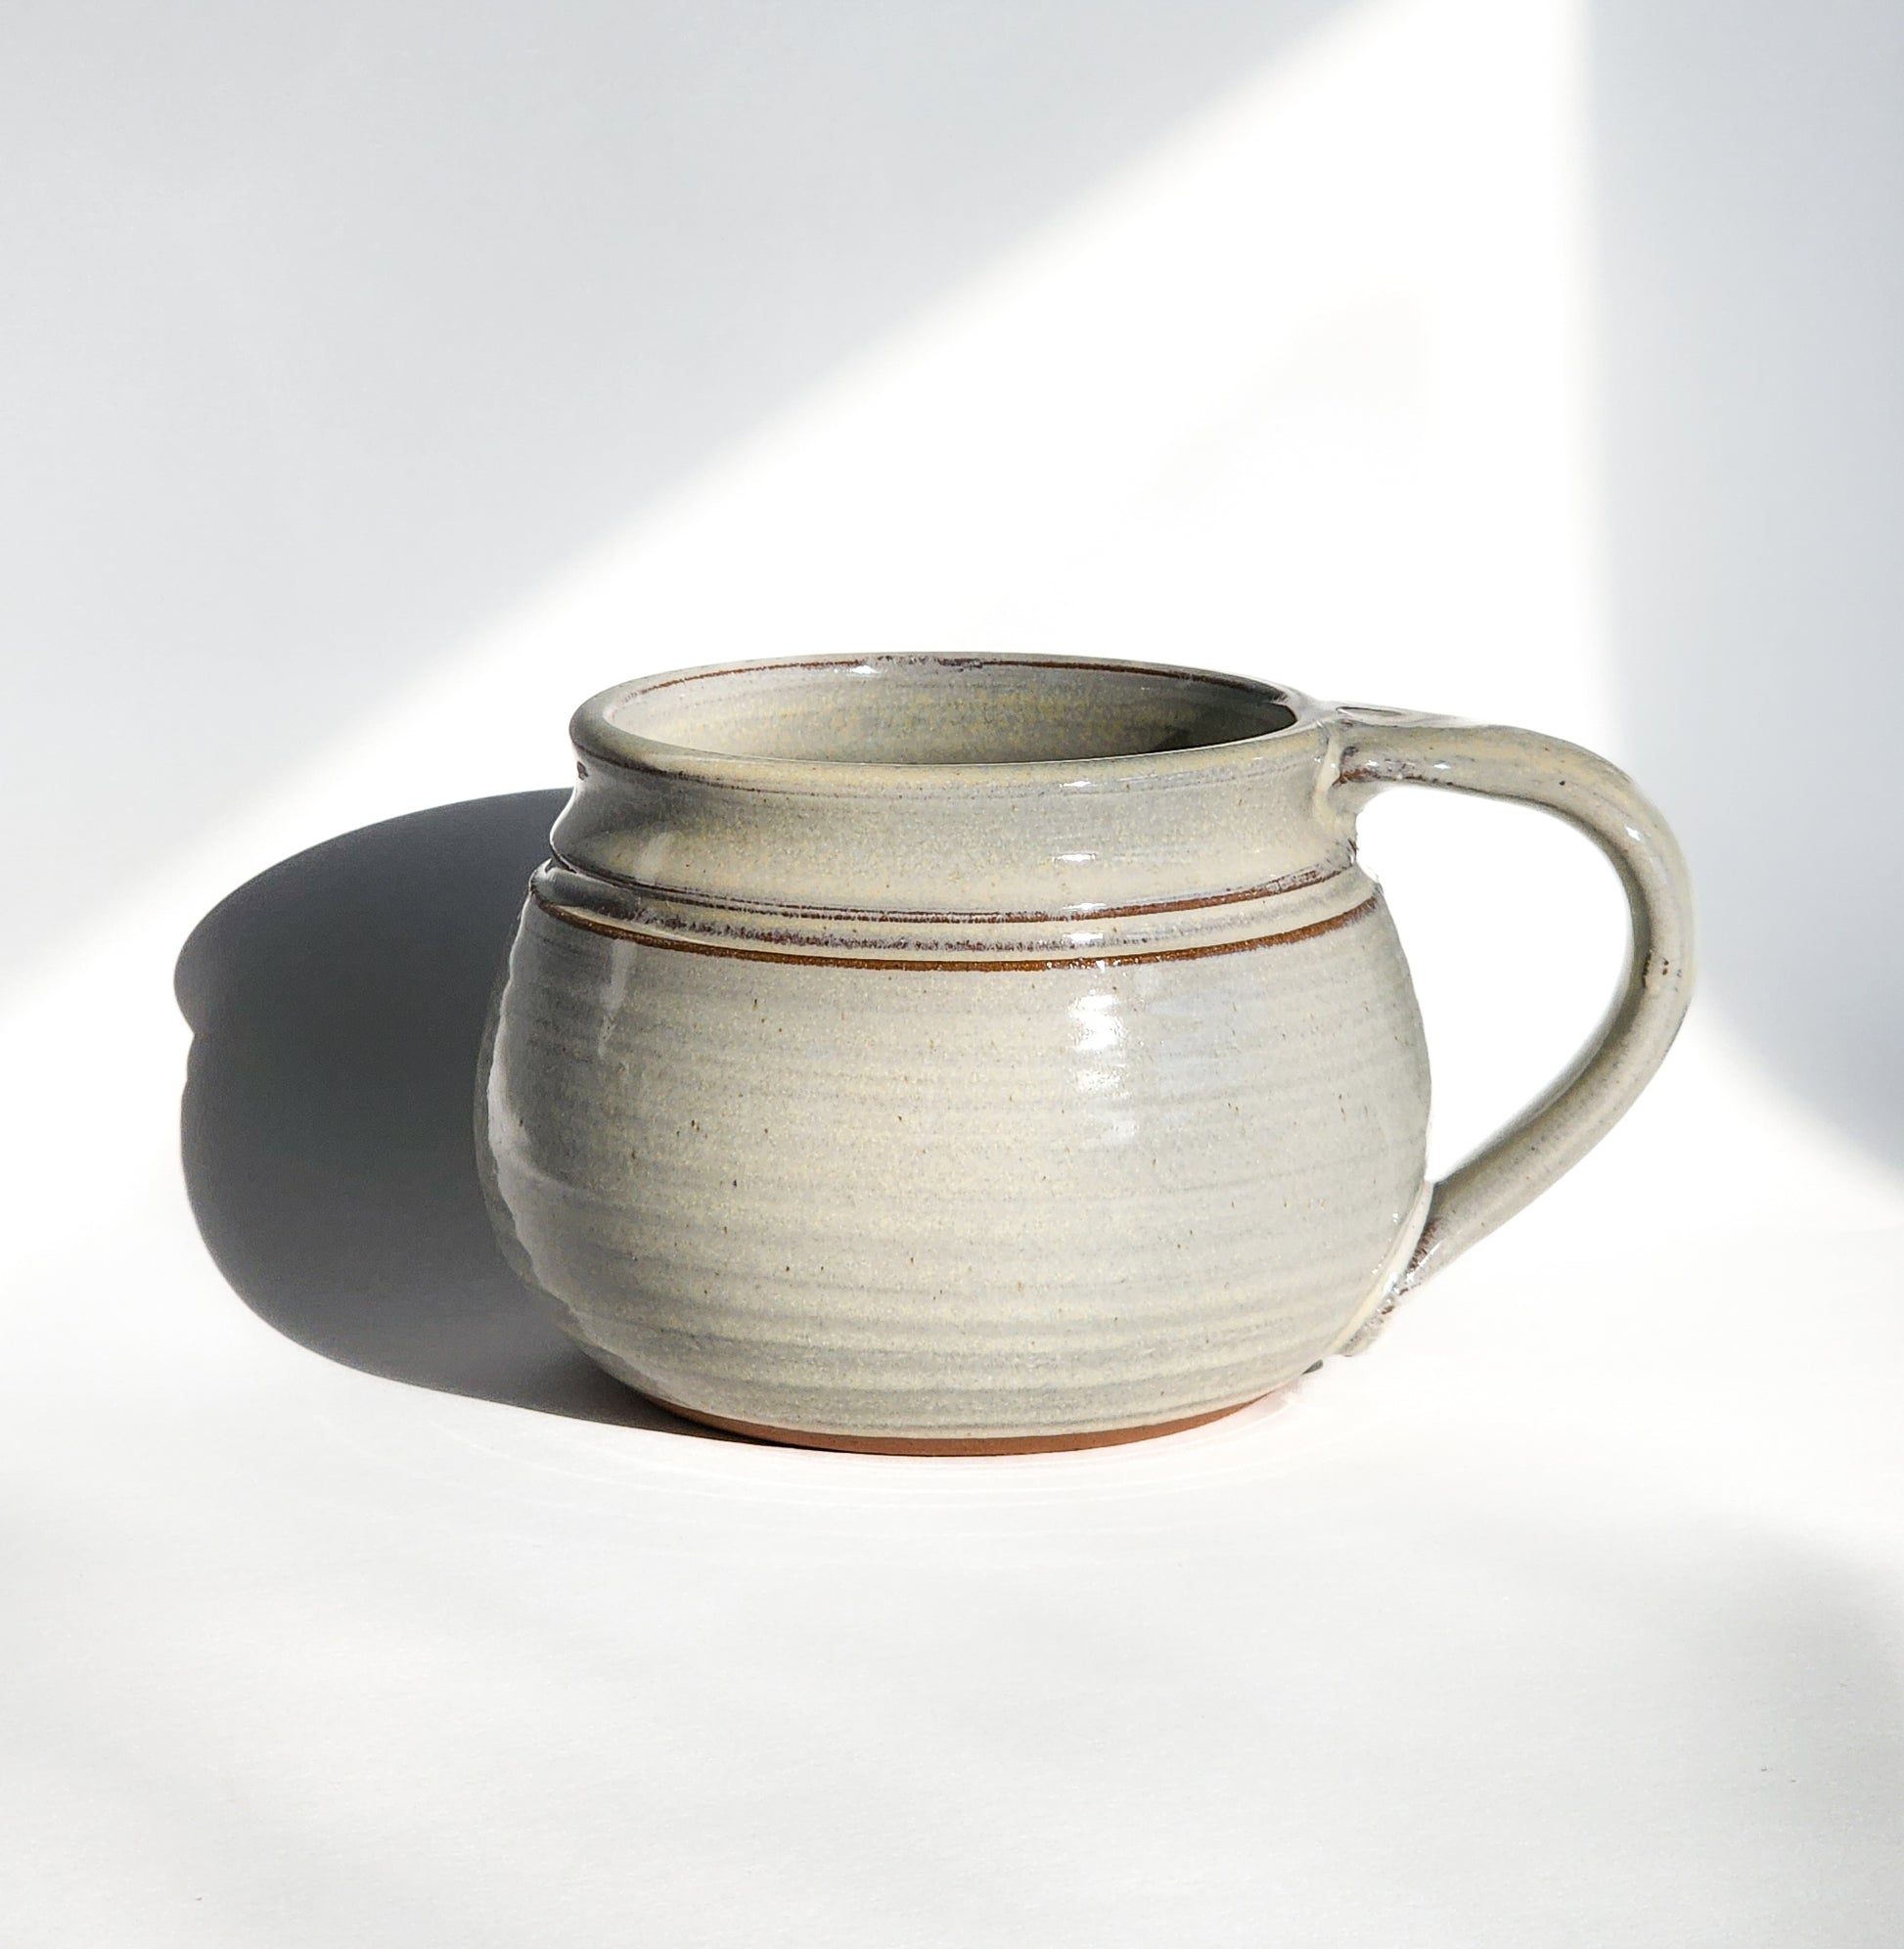 Image: Clinton Pottery's 24 oz Cereal/Soup Mug in White – A classic and versatile addition to your kitchen, this machine washable mug seamlessly blends artistry with functionality. The timeless White color adds a clean and neutral touch, reminiscent of simplicity and clarity. Perfect for enjoying your favorite cereal or soup, bringing an understated elegance to your dining experience.